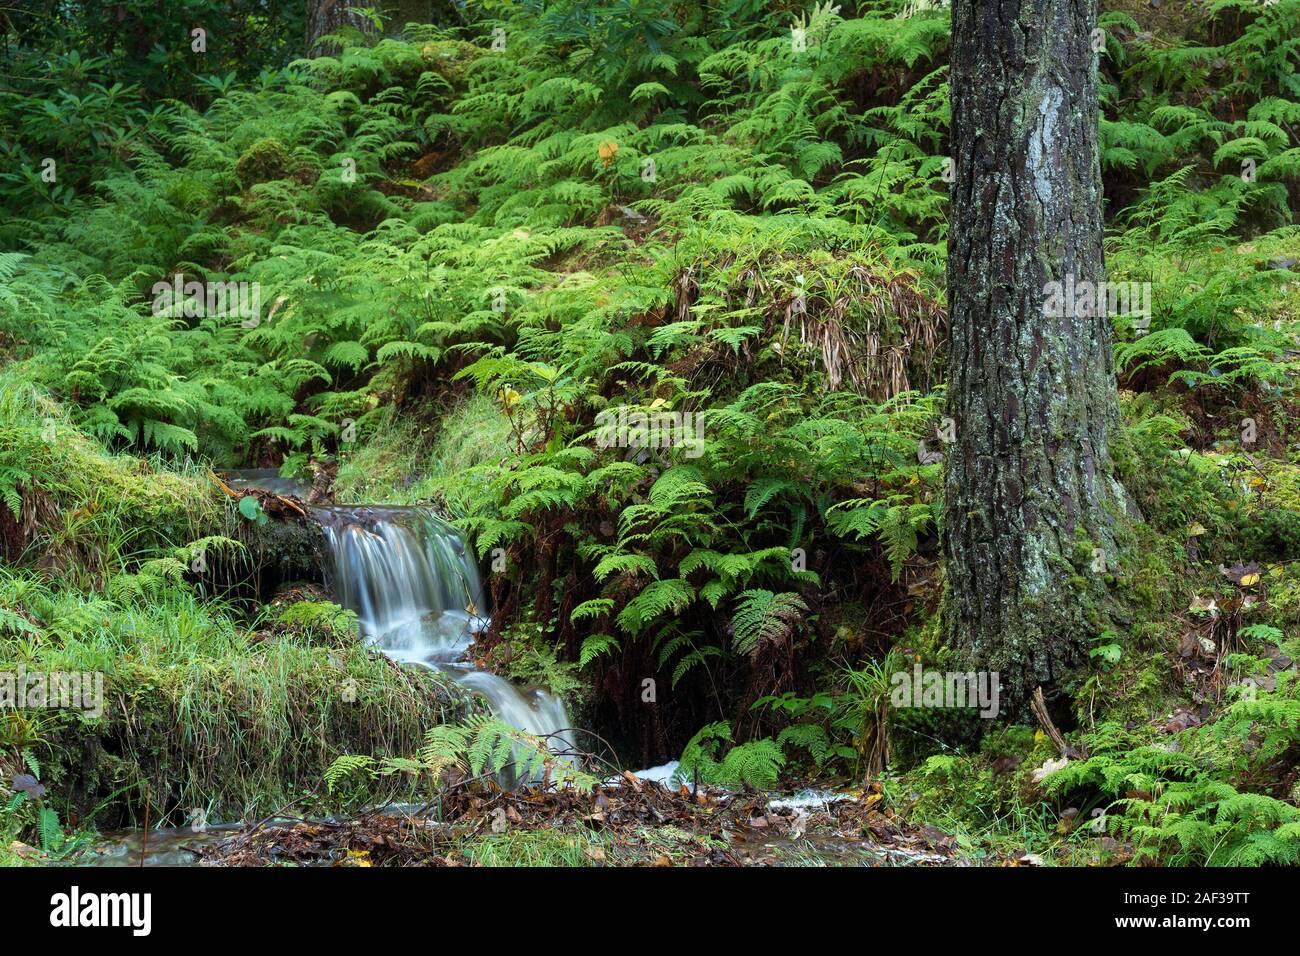 Autumn woodland scene with flowing water and ferns at Glengarra Woods, Cahir, Tipperary, Ireland Stock Photo